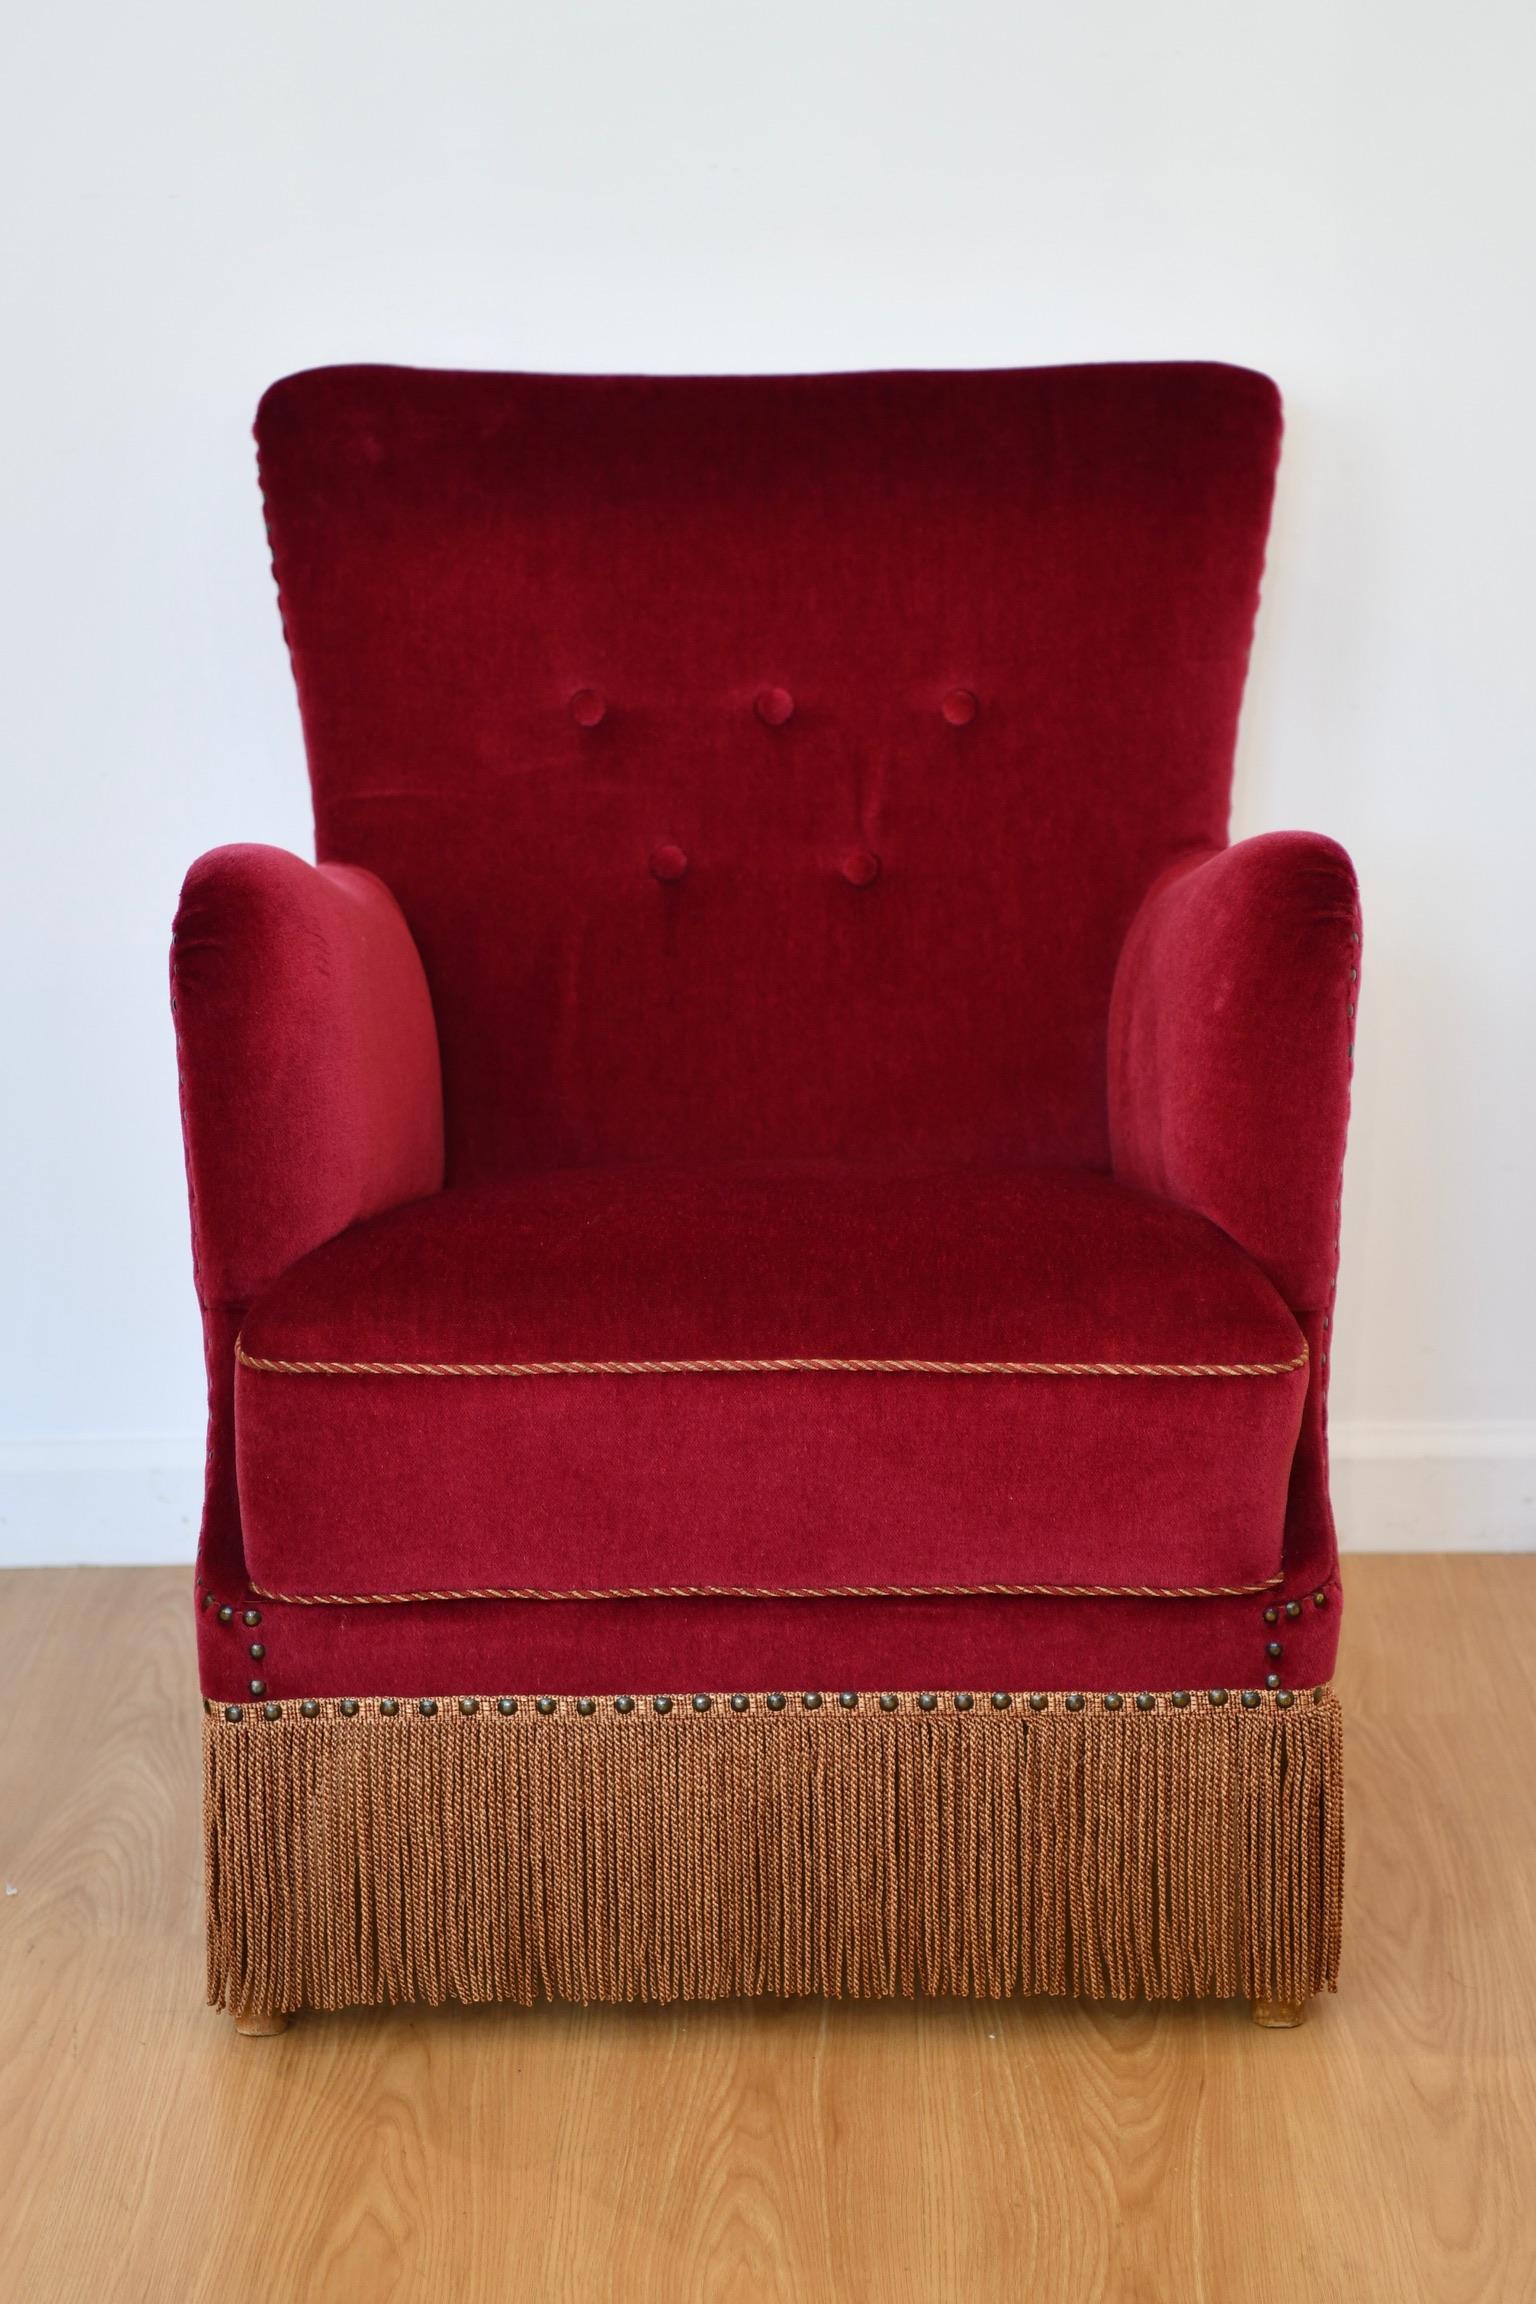 Danish mid-century lounge chair in rich red mohair velvet, with corded fringe trim and beechwood legs in the manner of Frits Henningsen. Apparently unsigned, circa 1940's-1950's. Dimensions: 31